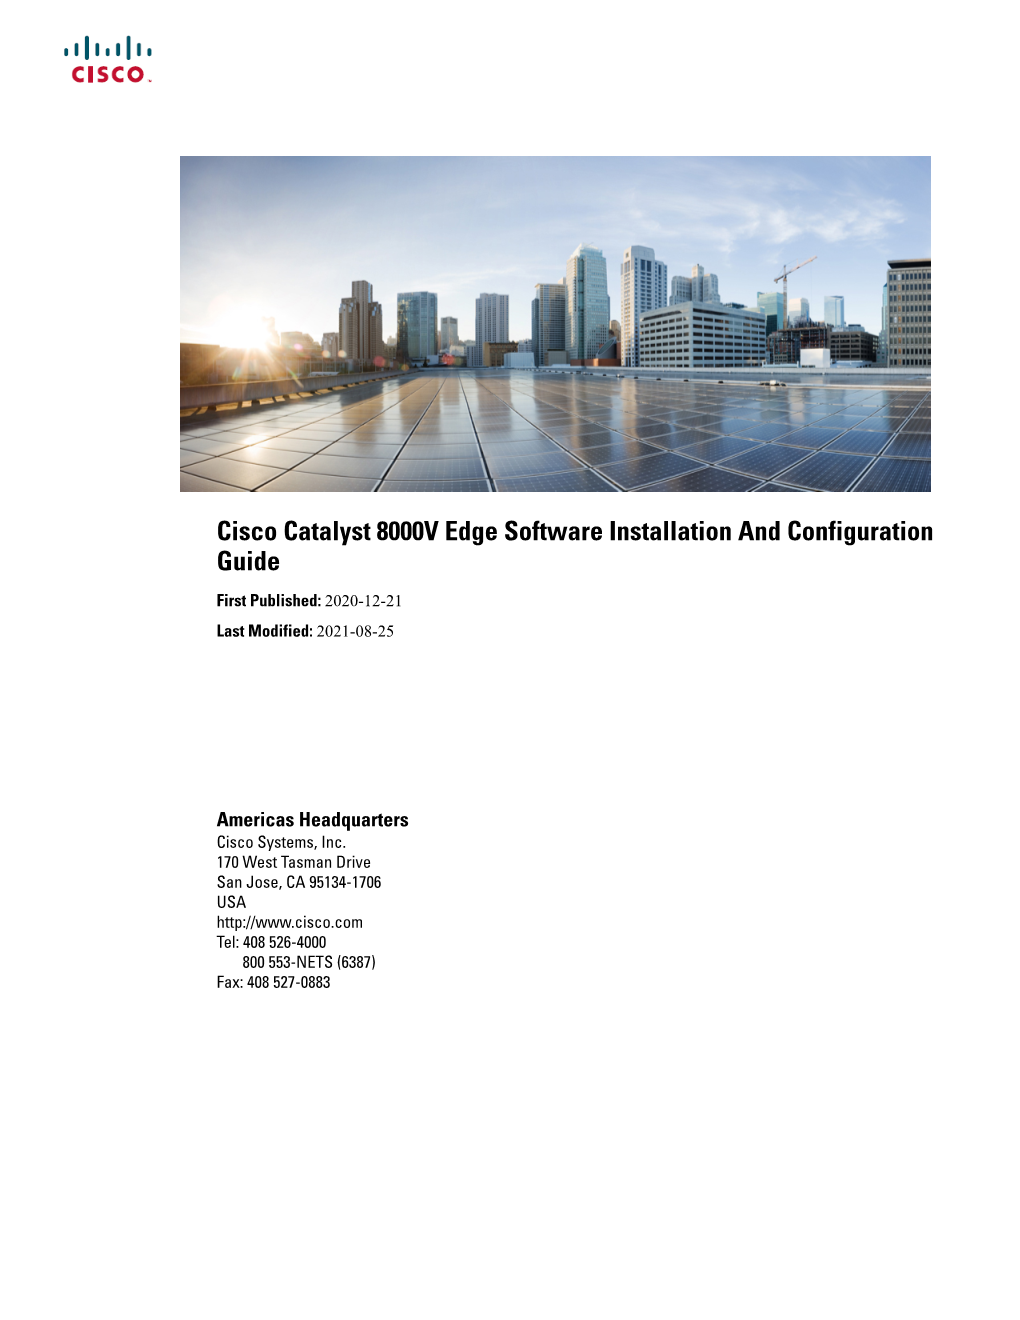 Cisco Catalyst 8000V Edge Software Installation and Configuration Guide